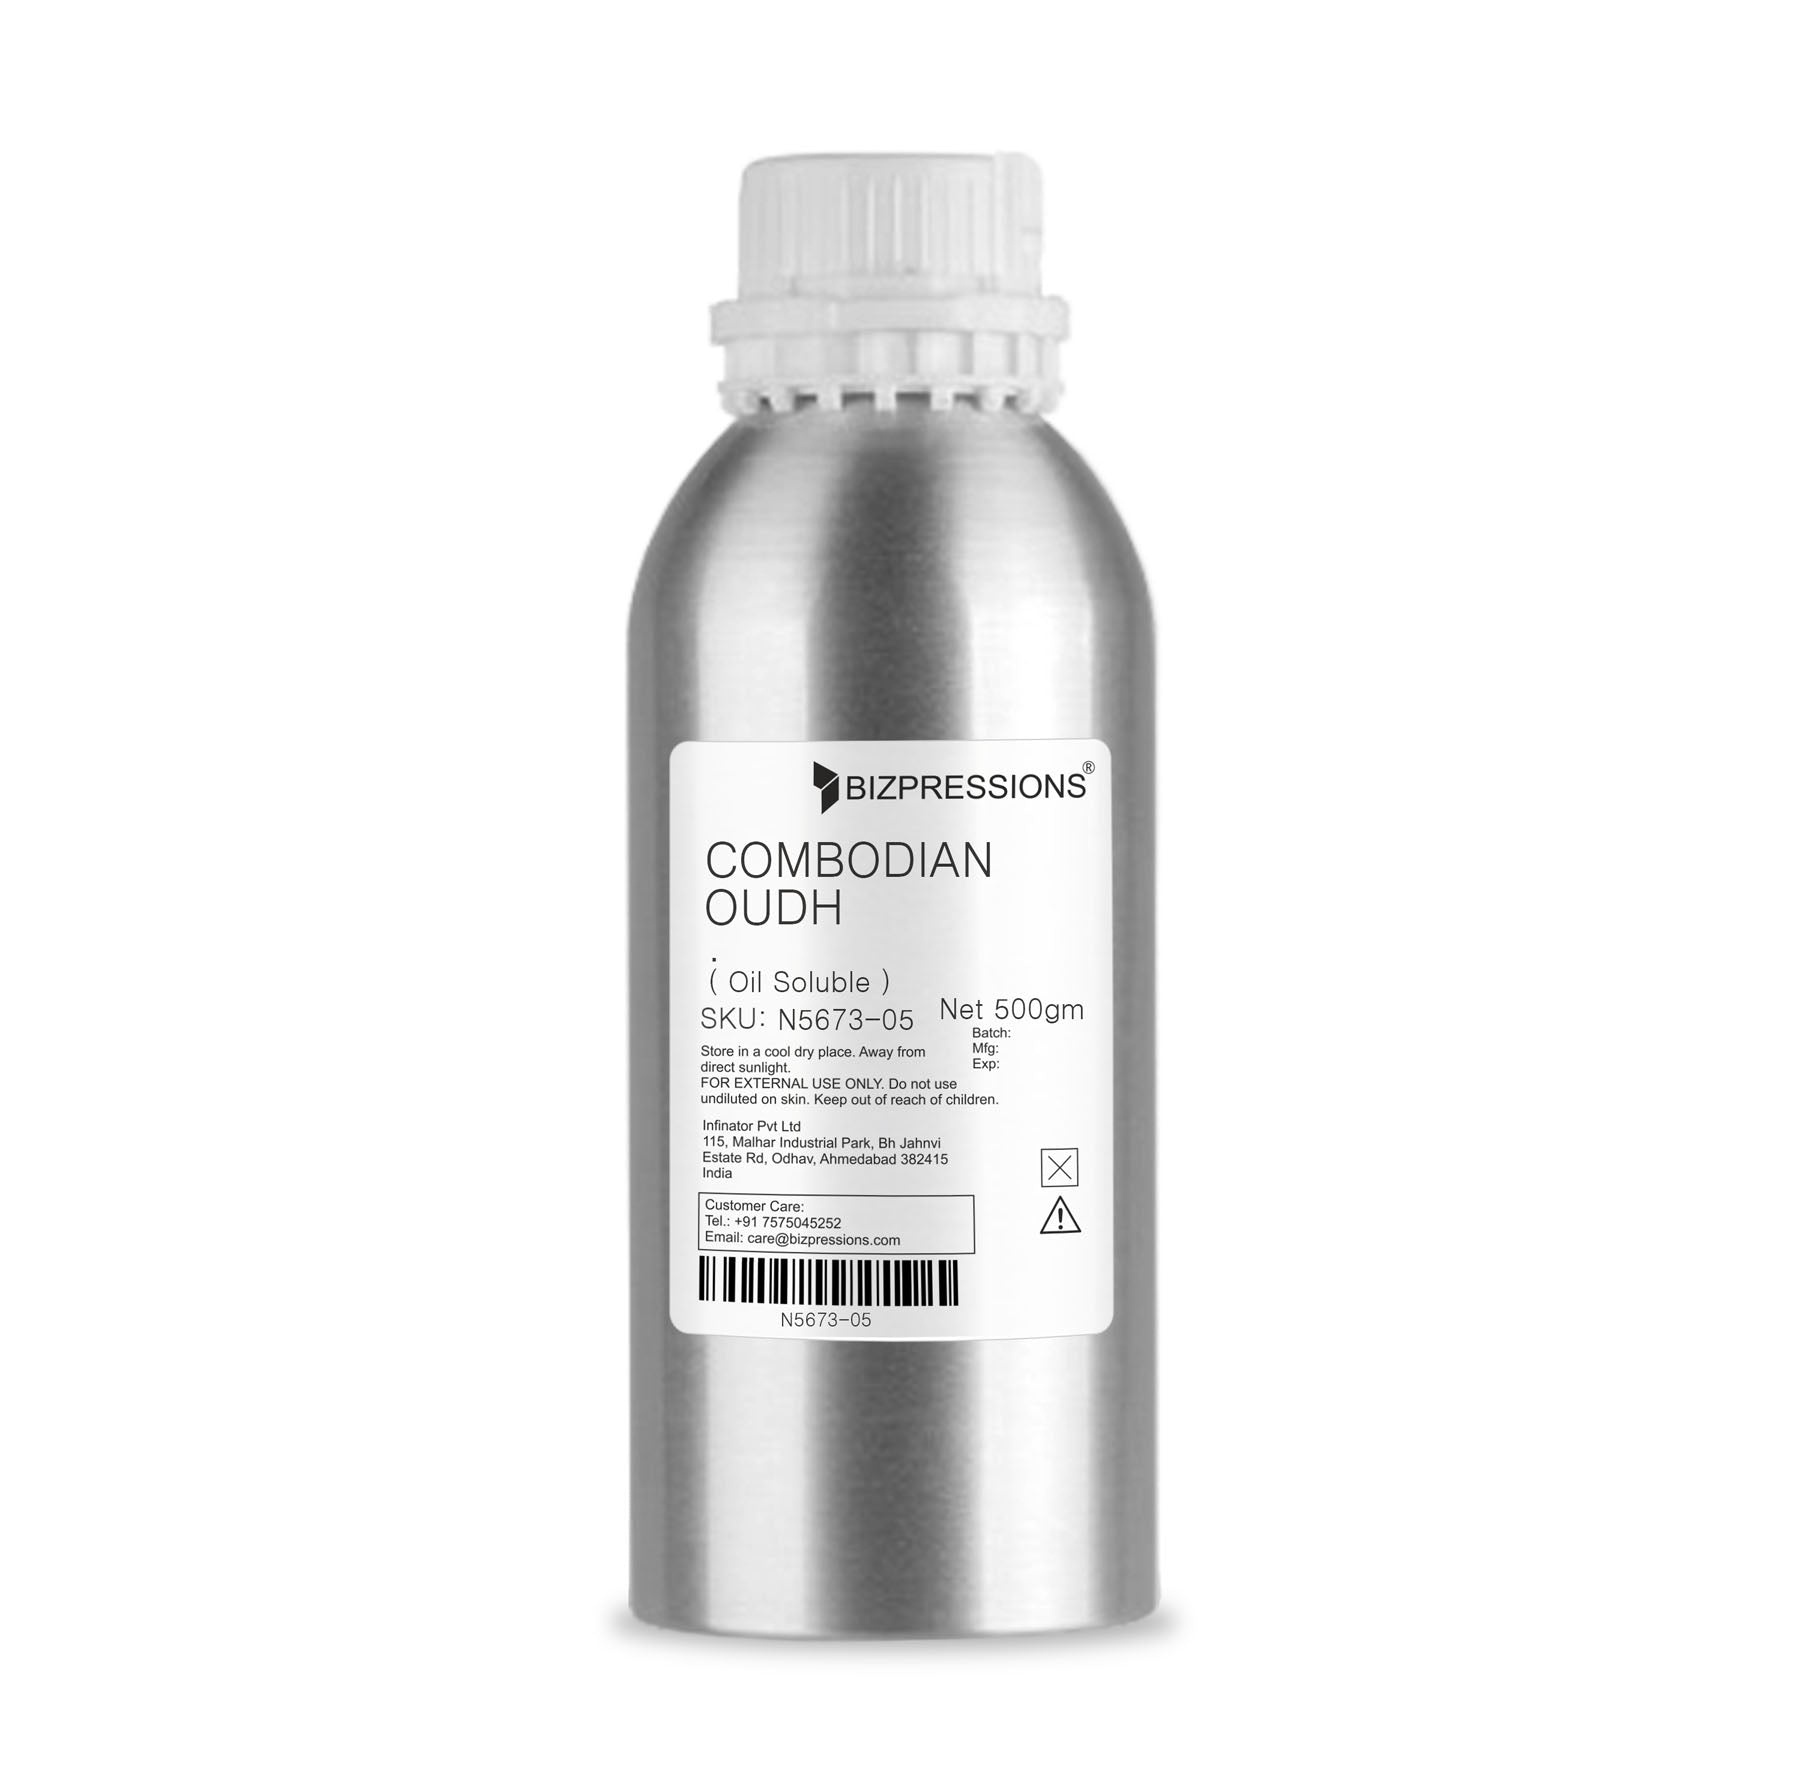 COMBODIAN OUDH - Fragrance ( Oil Soluble ) - 500 gm